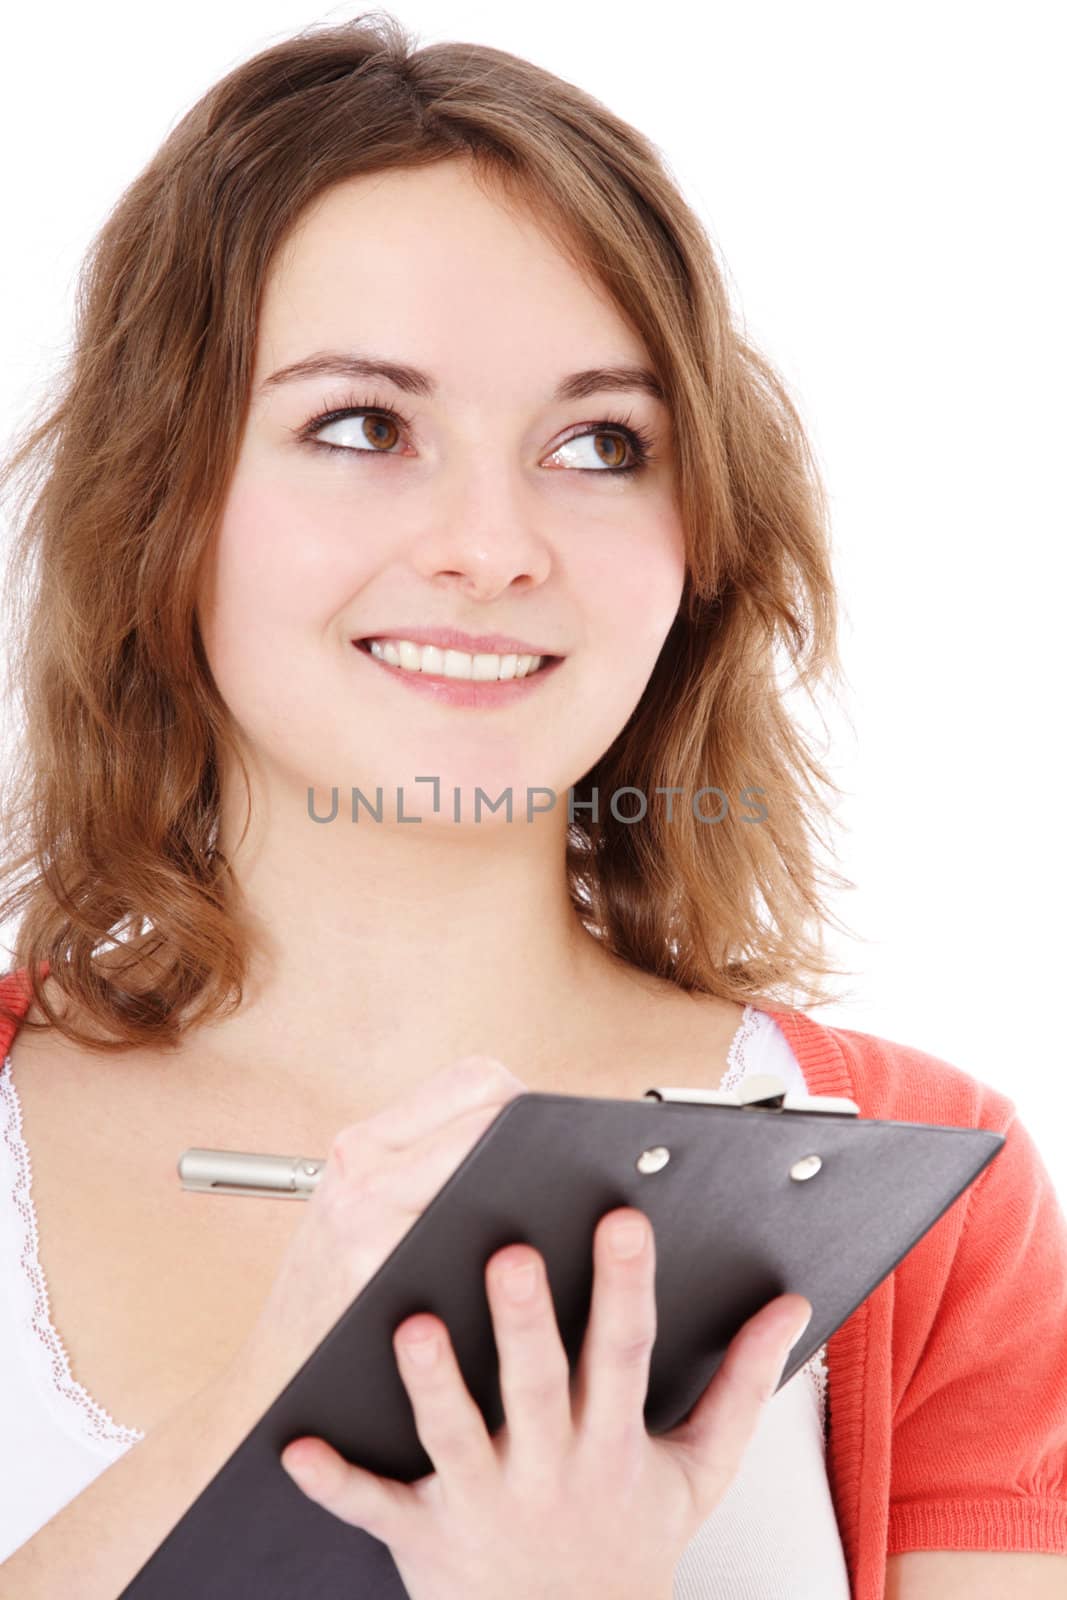 Attractive young woman doing a survey. All on white background.